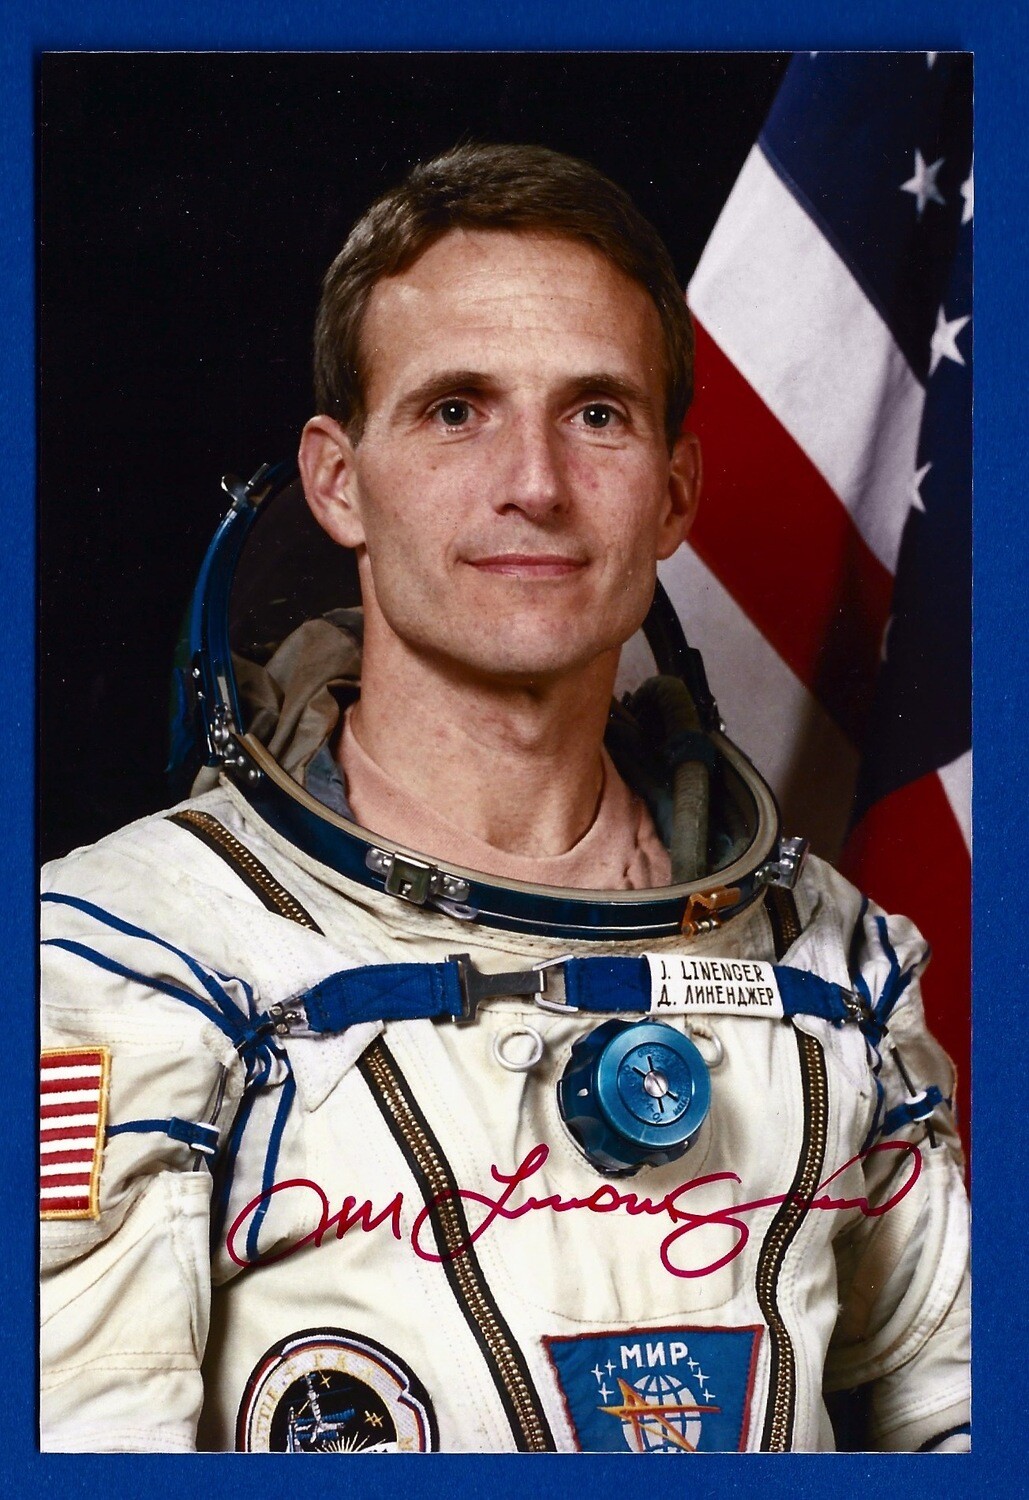 Jerry M. Linenger NASA astronaut signed picture